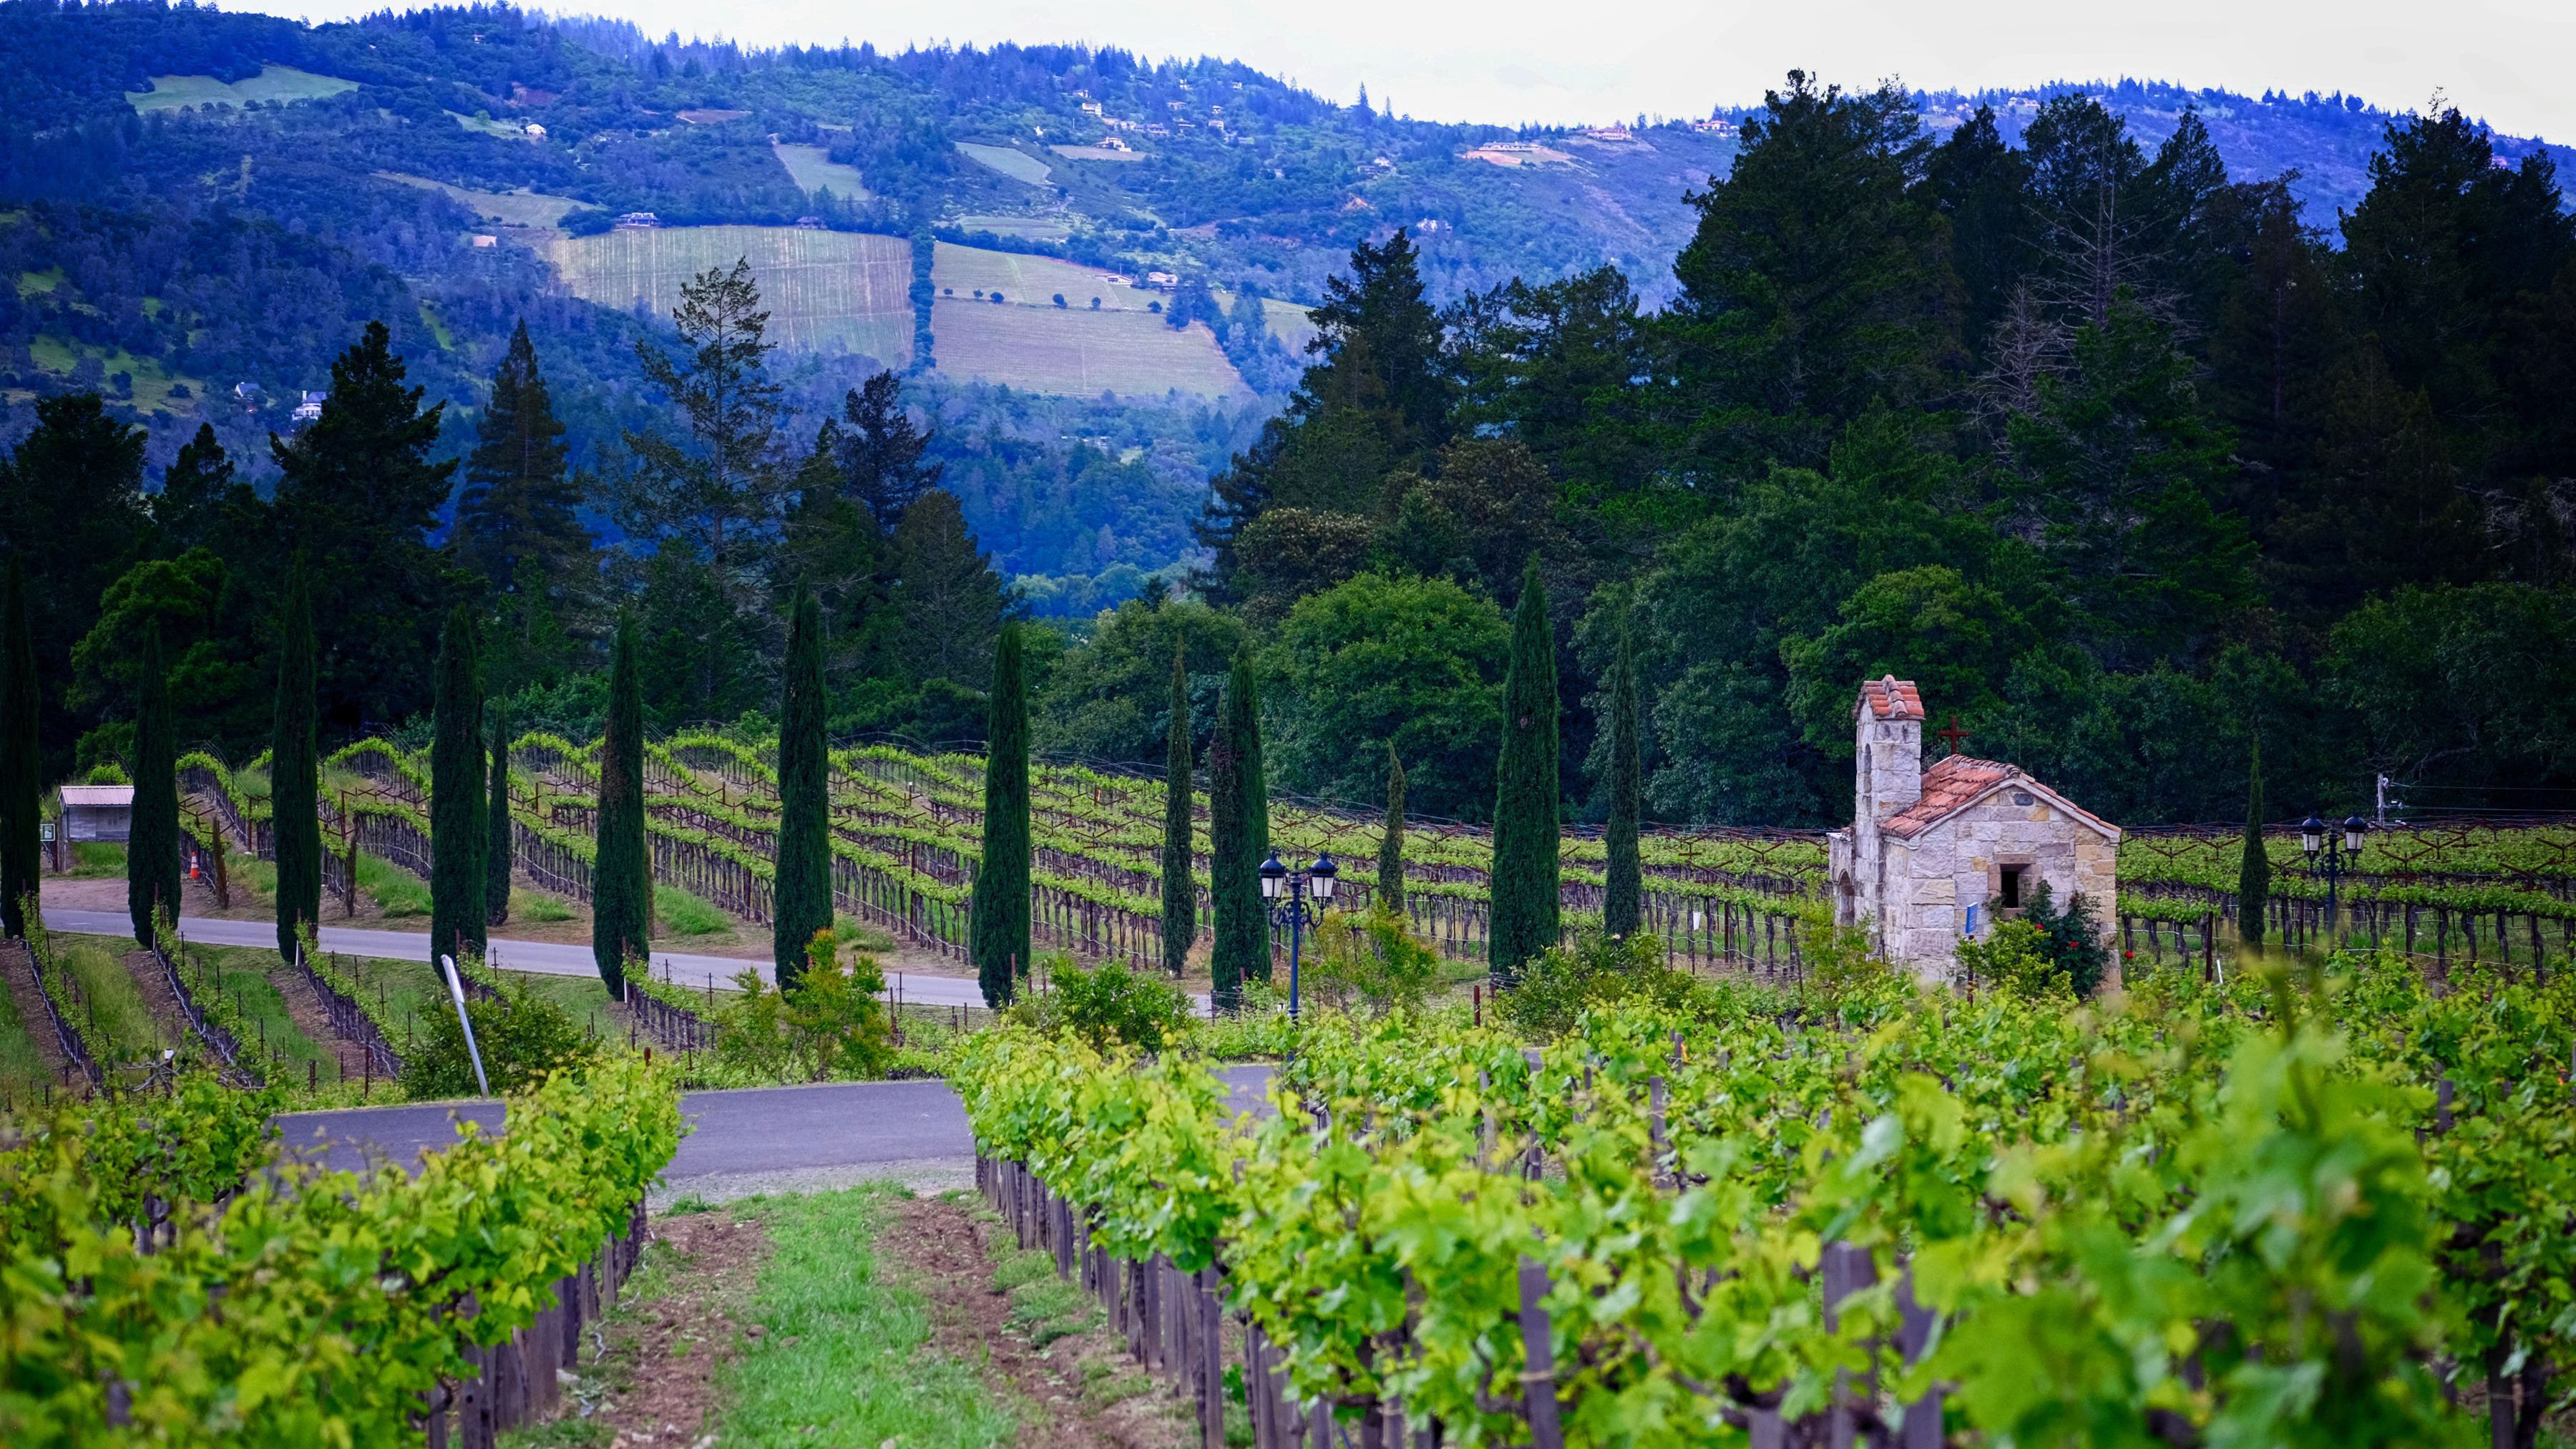 The Best of Napa Valley